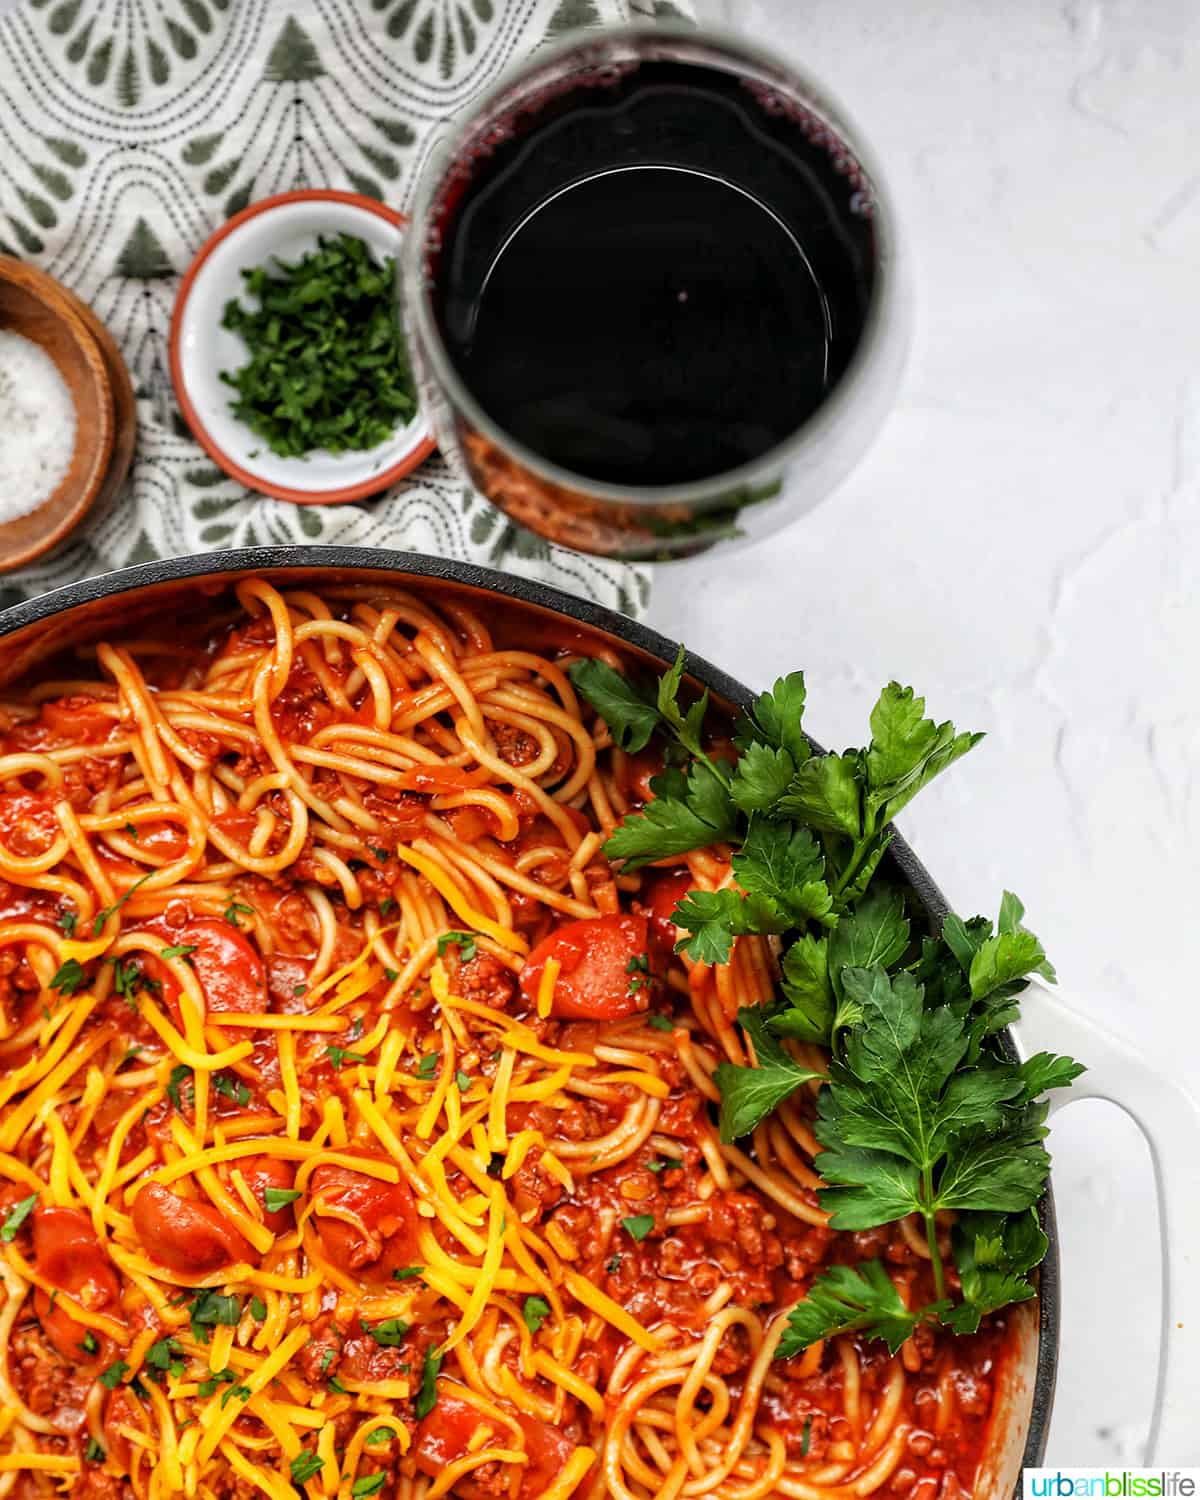 Filipino-style spaghetti in a saucepan with glass of red wine and side of salt, pepper, parsley, shredded cheese.